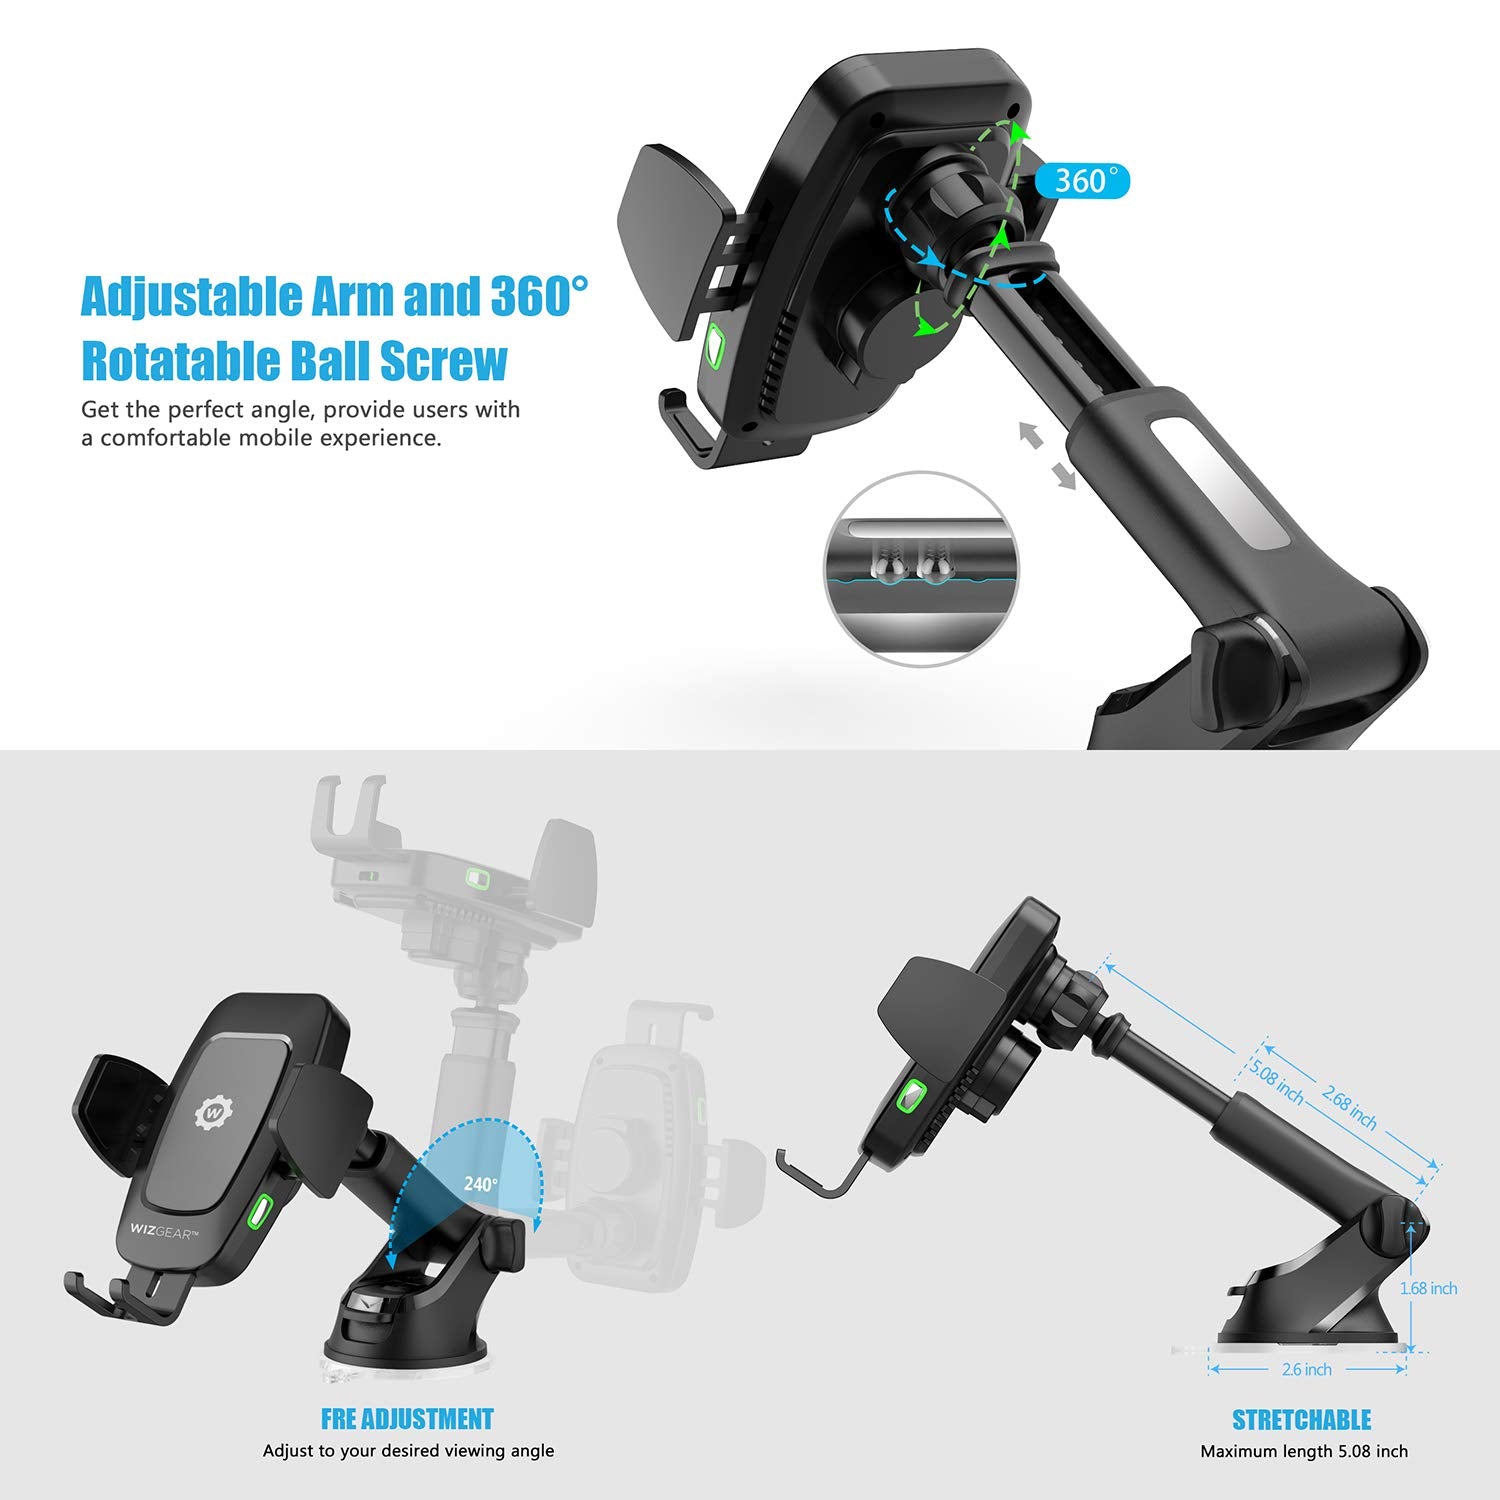 WizGear Automatic Wireless Car Charging Mount, With Telescopic Arm and Aider